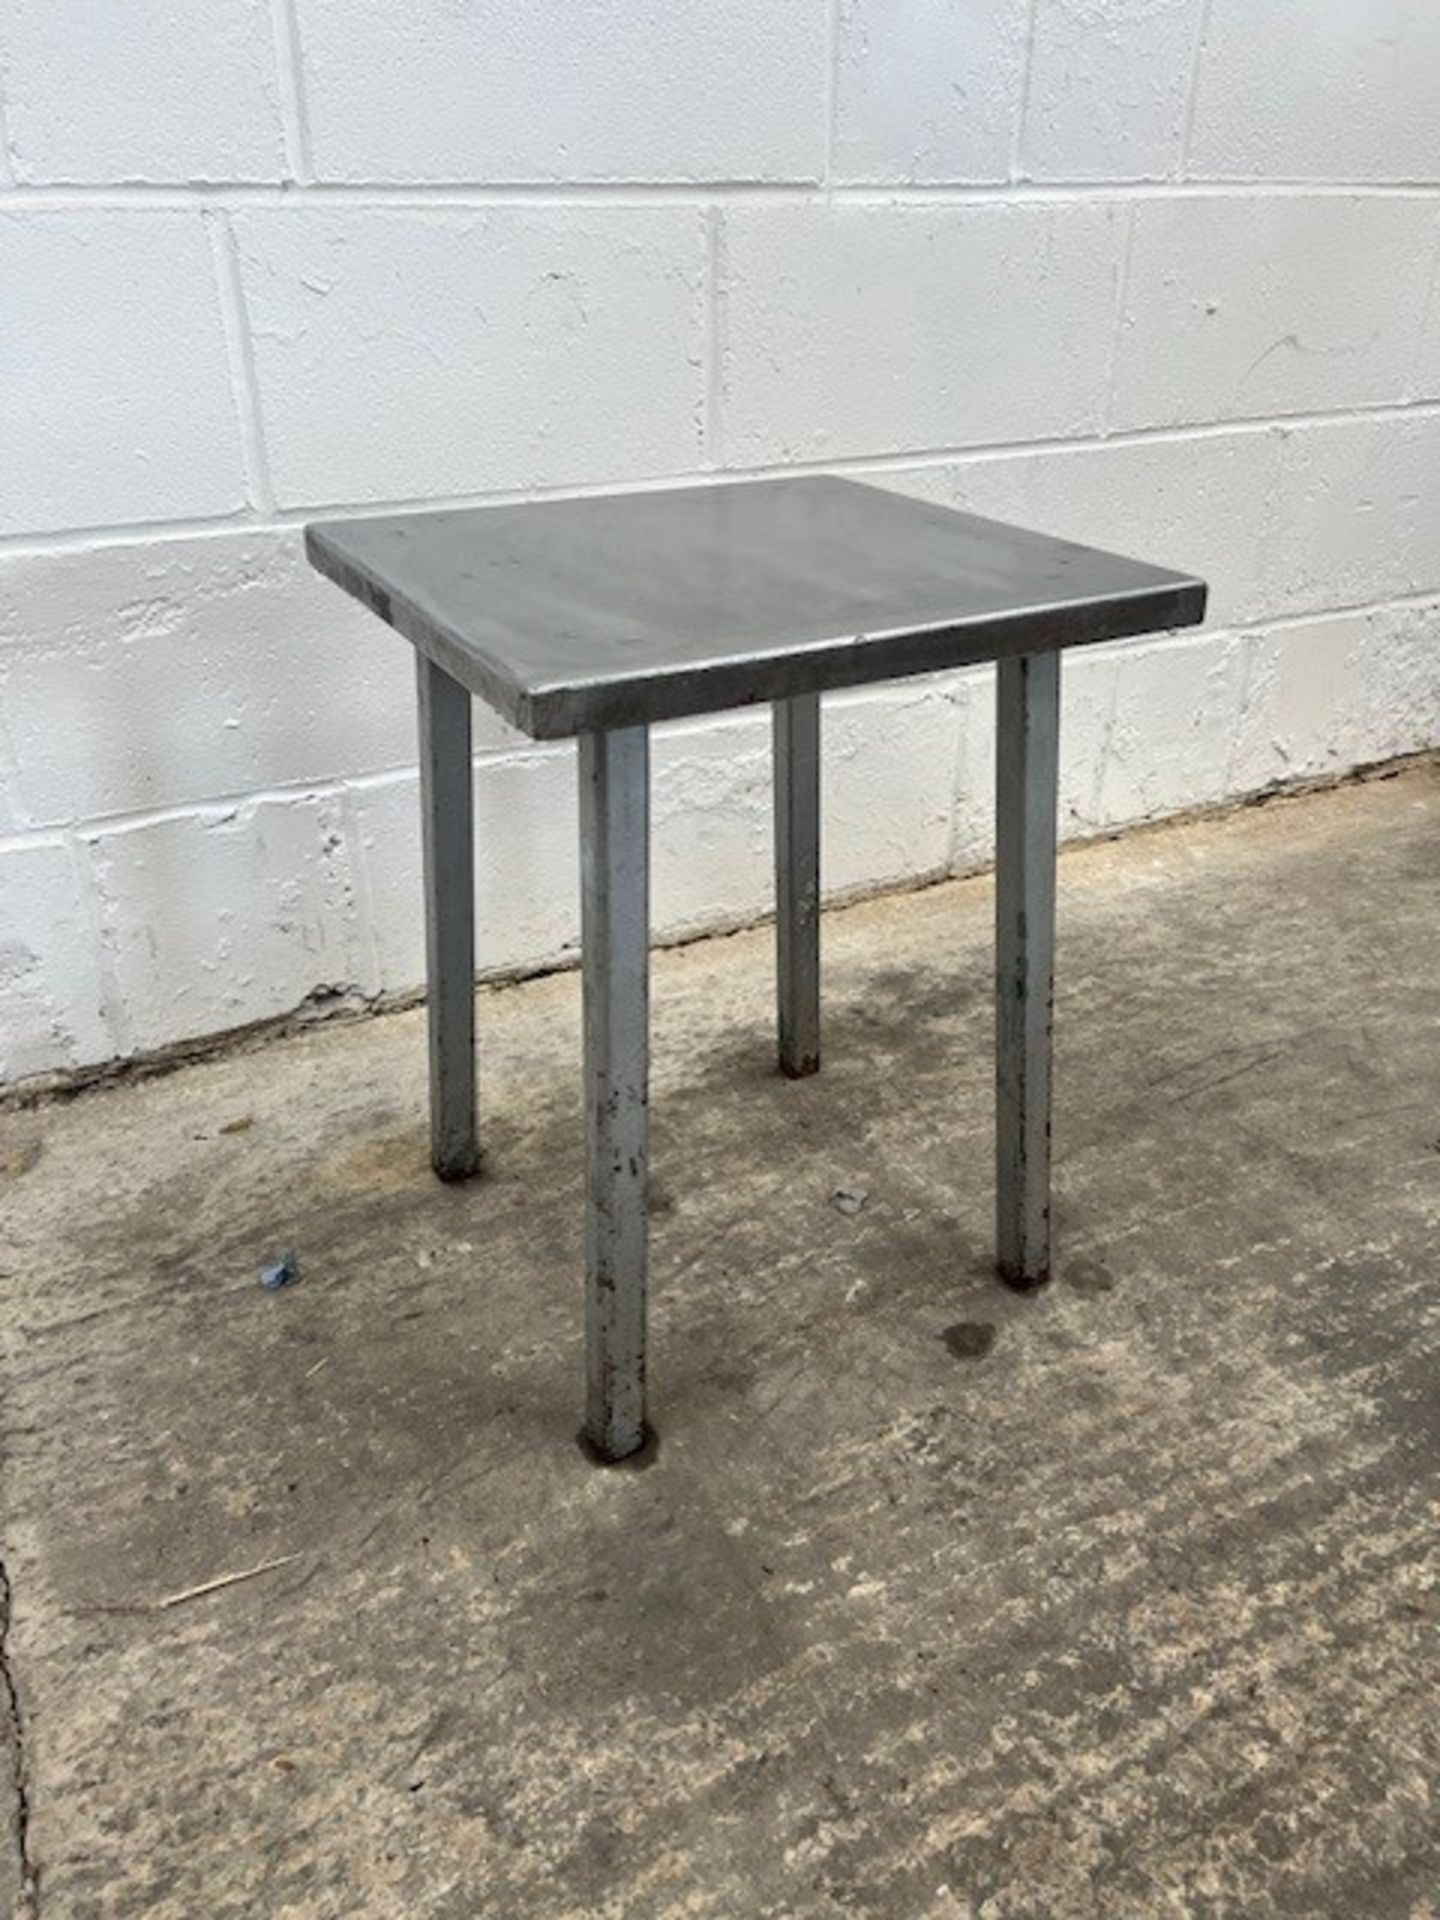 Stainless Steel Table - Image 2 of 3